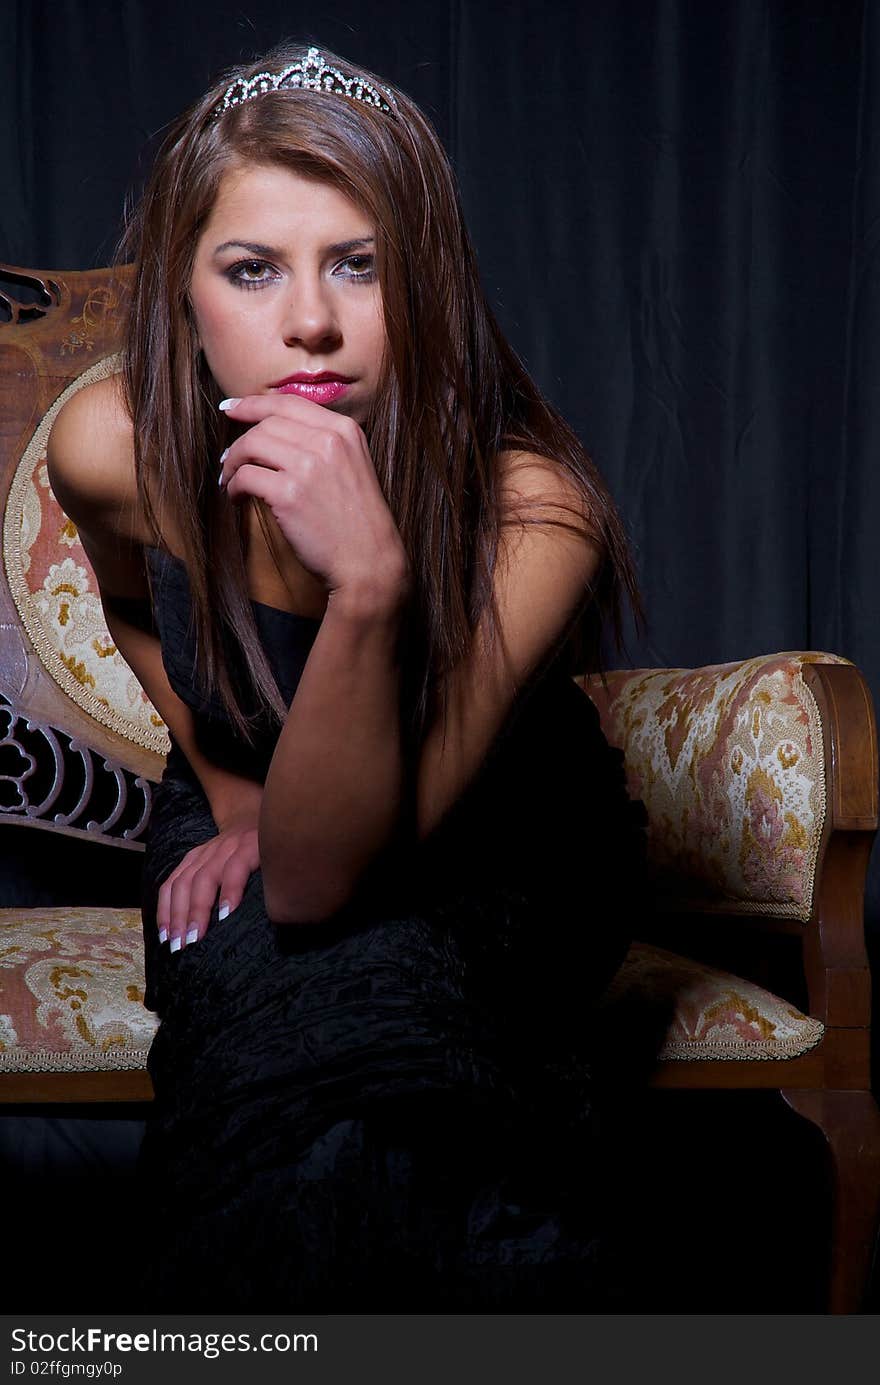 Girl wearing black prom dress and a crown sitting on the antique sofa, black background. Girl wearing black prom dress and a crown sitting on the antique sofa, black background